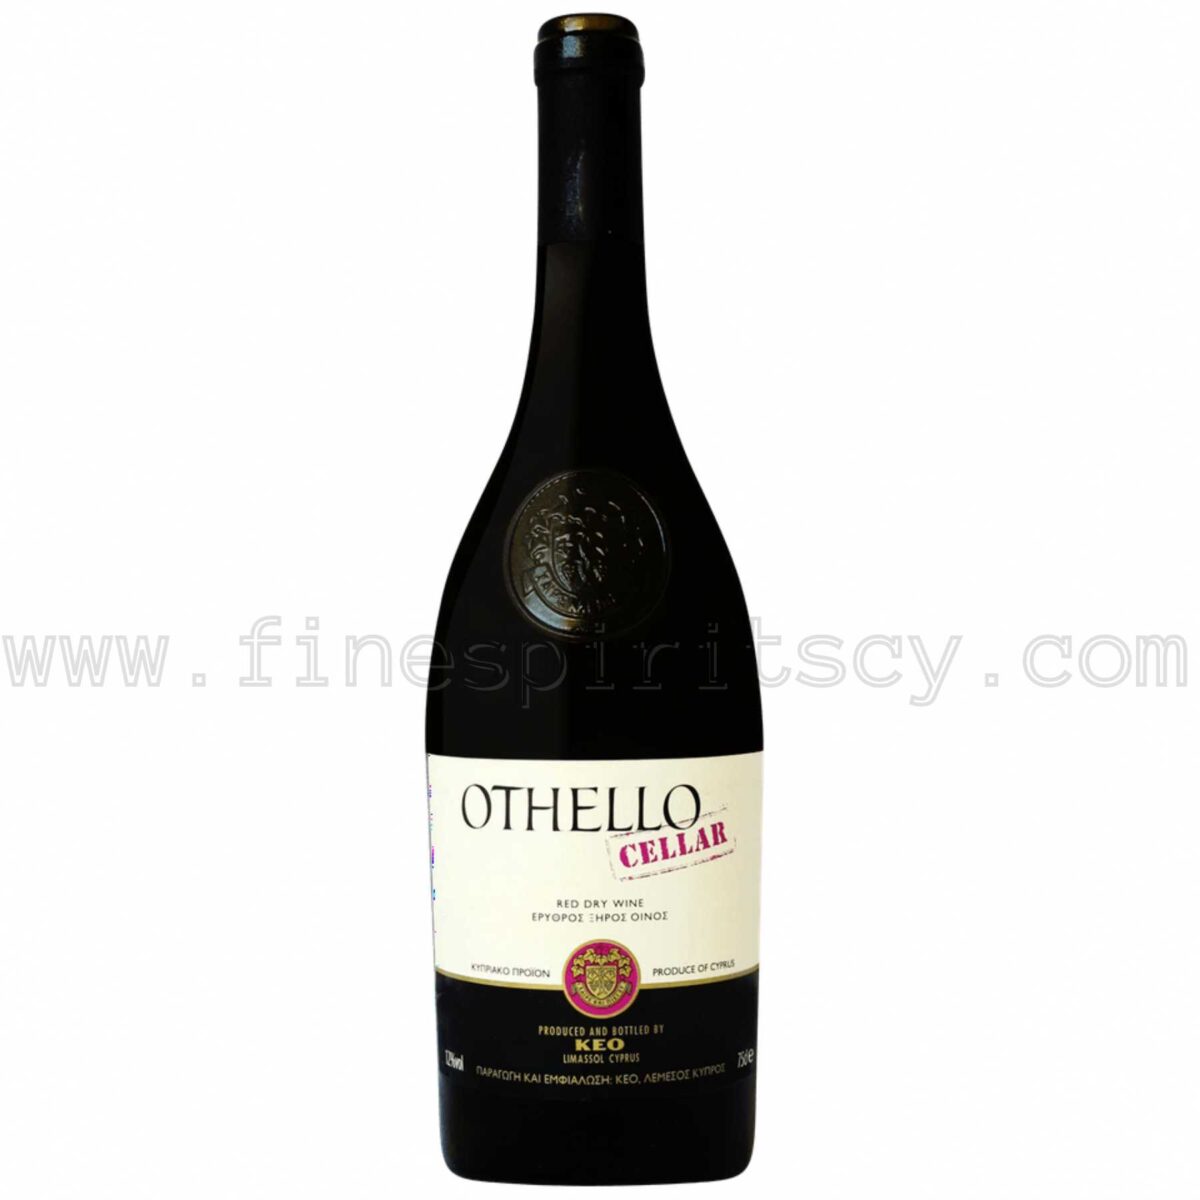 KEO Othello Cellar Wine Dry Red Cyprus Cypriot